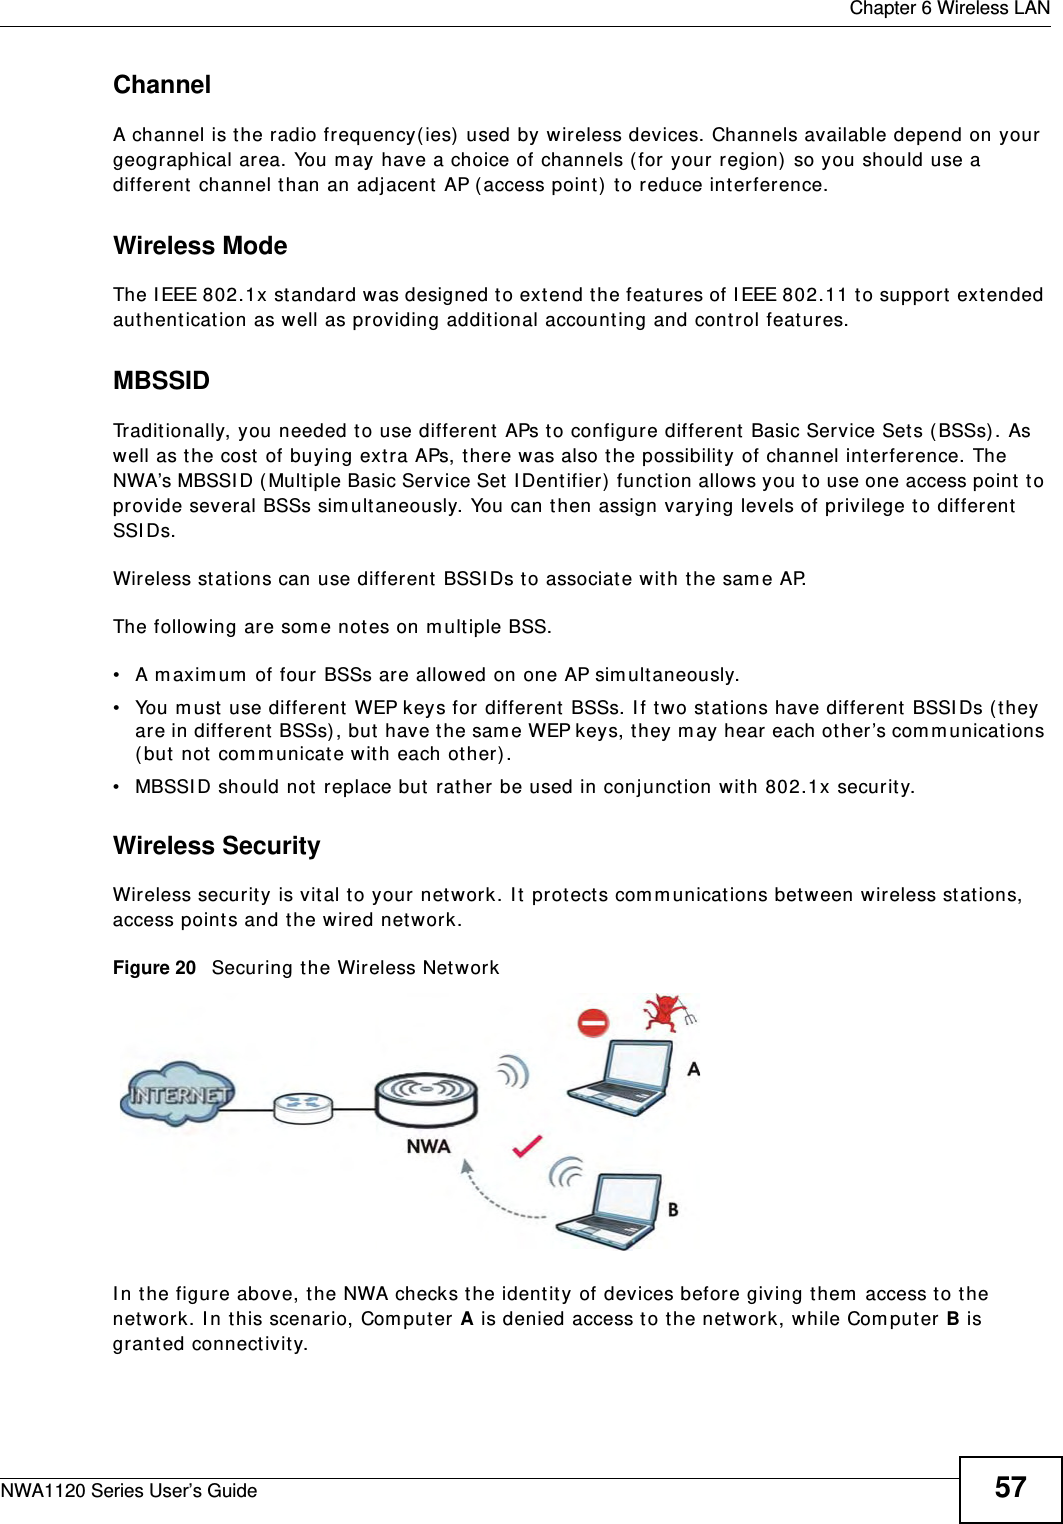  Chapter 6 Wireless LANNWA1120 Series User’s Guide 57ChannelA channel is the radio frequency(ies) used by wireless devices. Channels available depend on your geographical area. You may have a choice of channels (for your region) so you should use a different channel than an adjacent AP (access point) to reduce interference.Wireless ModeThe IEEE 802.1x standard was designed to extend the features of IEEE 802.11 to support extended authentication as well as providing additional accounting and control features. MBSSIDTraditionally, you needed to use different APs to configure different Basic Service Sets (BSSs). As well as the cost of buying extra APs, there was also the possibility of channel interference. The NWA’s MBSSID (Multiple Basic Service Set IDentifier) function allows you to use one access point to provide several BSSs simultaneously. You can then assign varying levels of privilege to different SSIDs.Wireless stations can use different BSSIDs to associate with the same AP. The following are some notes on multiple BSS. • A maximum of four BSSs are allowed on one AP simultaneously.• You must use different WEP keys for different BSSs. If two stations have different BSSIDs (they are in different BSSs), but have the same WEP keys, they may hear each other’s communications (but not communicate with each other).• MBSSID should not replace but rather be used in conjunction with 802.1x security.Wireless SecurityWireless security is vital to your network. It protects communications between wireless stations, access points and the wired network. Figure 20   Securing the Wireless NetworkIn the figure above, the NWA checks the identity of devices before giving them access to the network. In this scenario, Computer A is denied access to the network, while Computer B is granted connectivity.